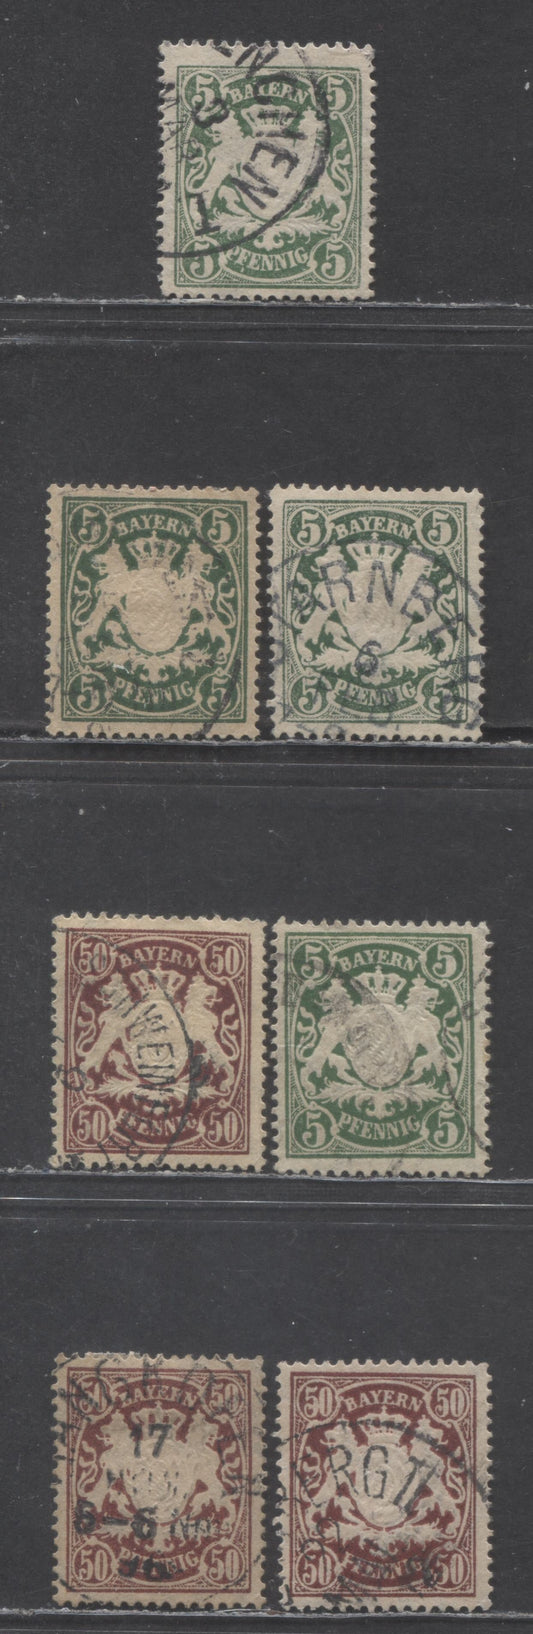 Lot 99 Germany - Bavaria Mi#61x (62a)-63x (70a) 1888-1900 Arms Issue, Toned Paper, Perf 14 x 14.5, Horizontal Wavy Line Wmks, 7 Fine/Very Fine Used Singles, Click on Listing to See ALL Pictures, Estimated Value $10